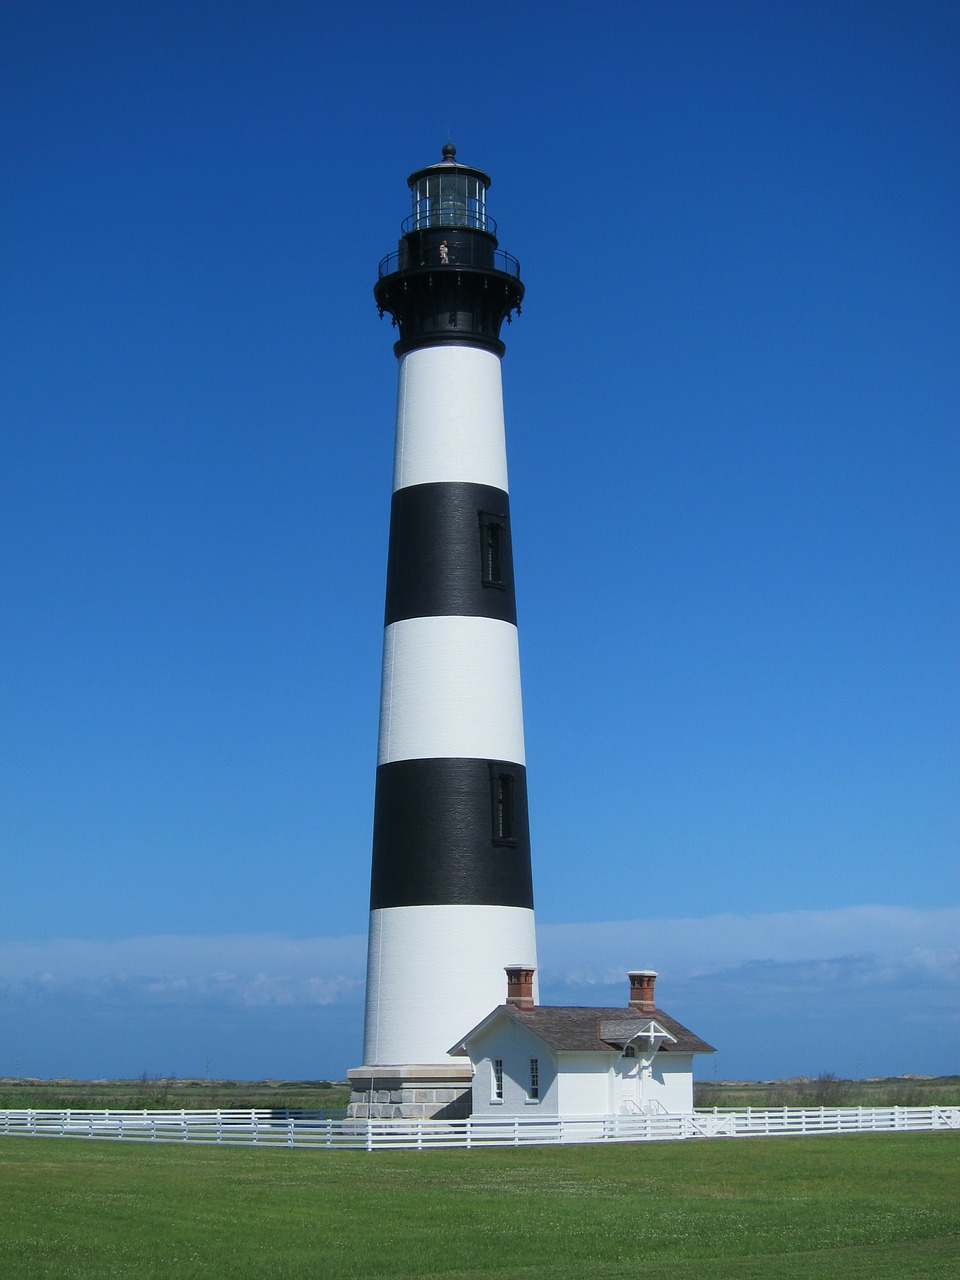 Image of a lighthouse in North Carolina